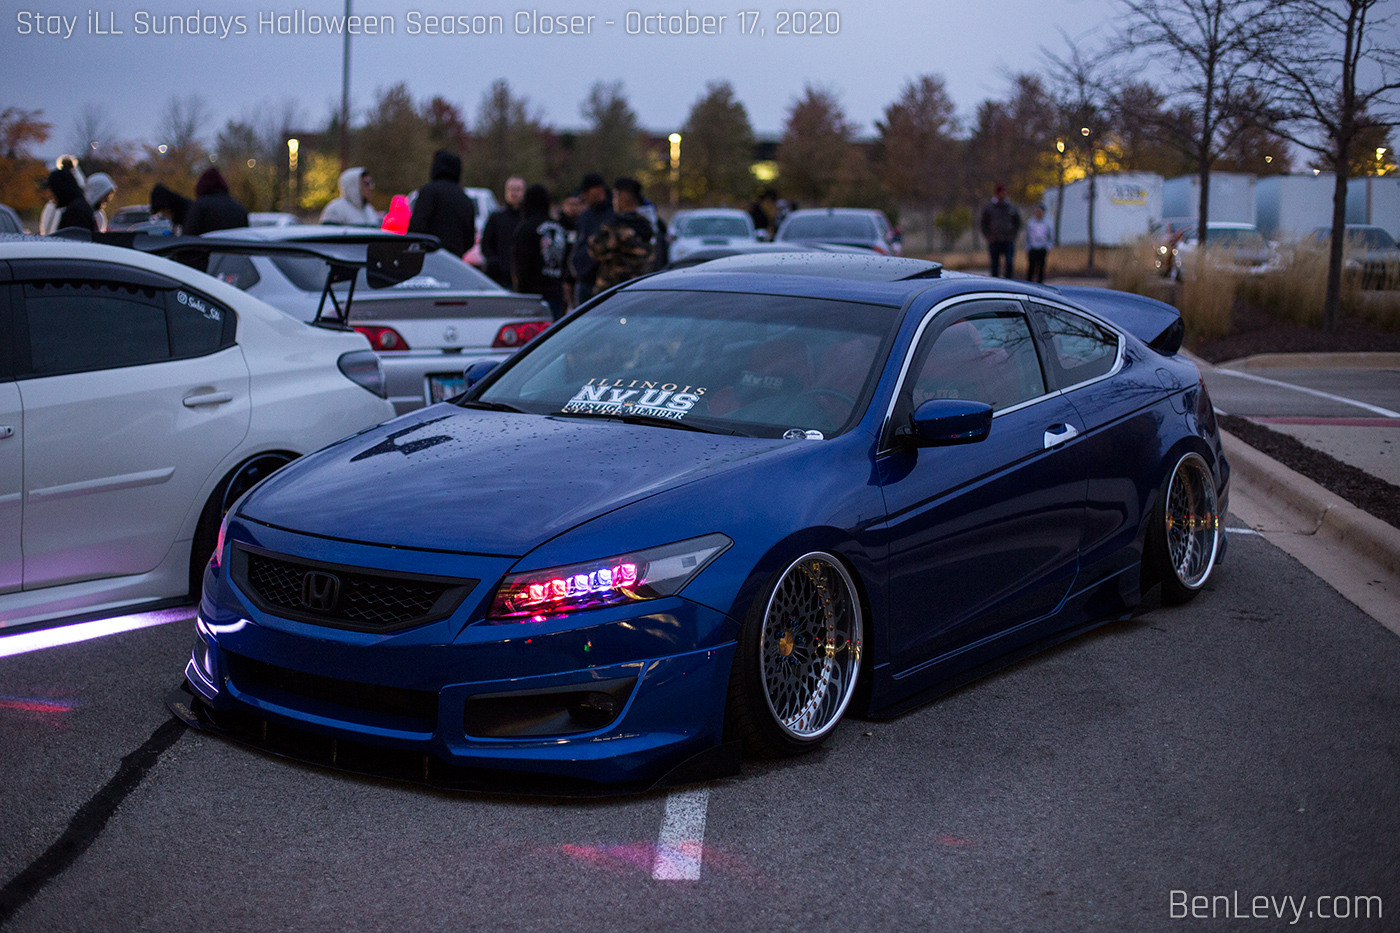 Blue Accord Coupe with jewel headlights